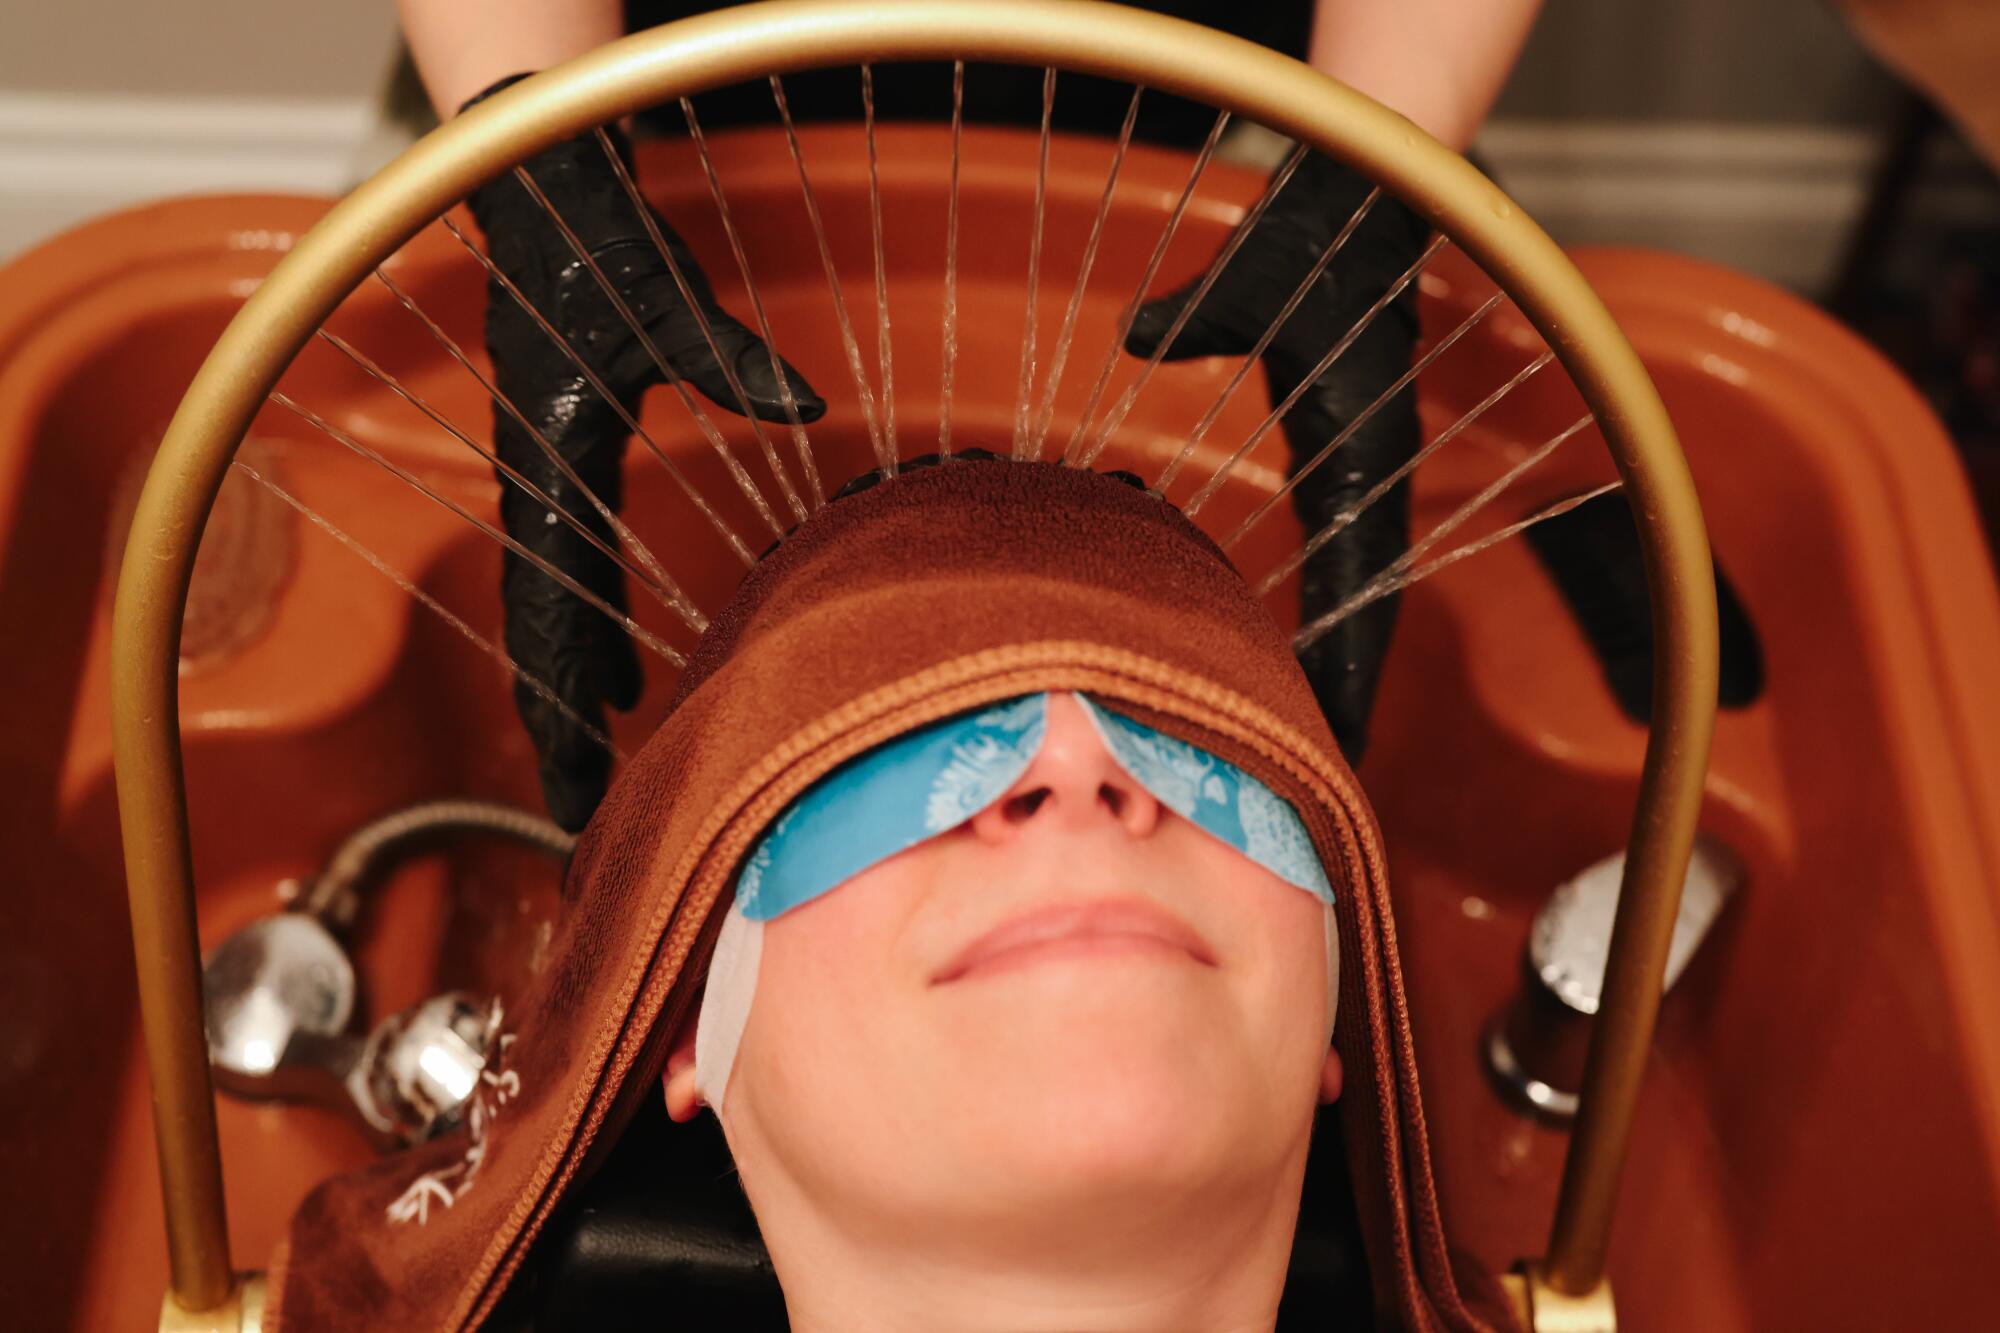 A smiling woman receives a Chinese scalp treatment at a head spa.